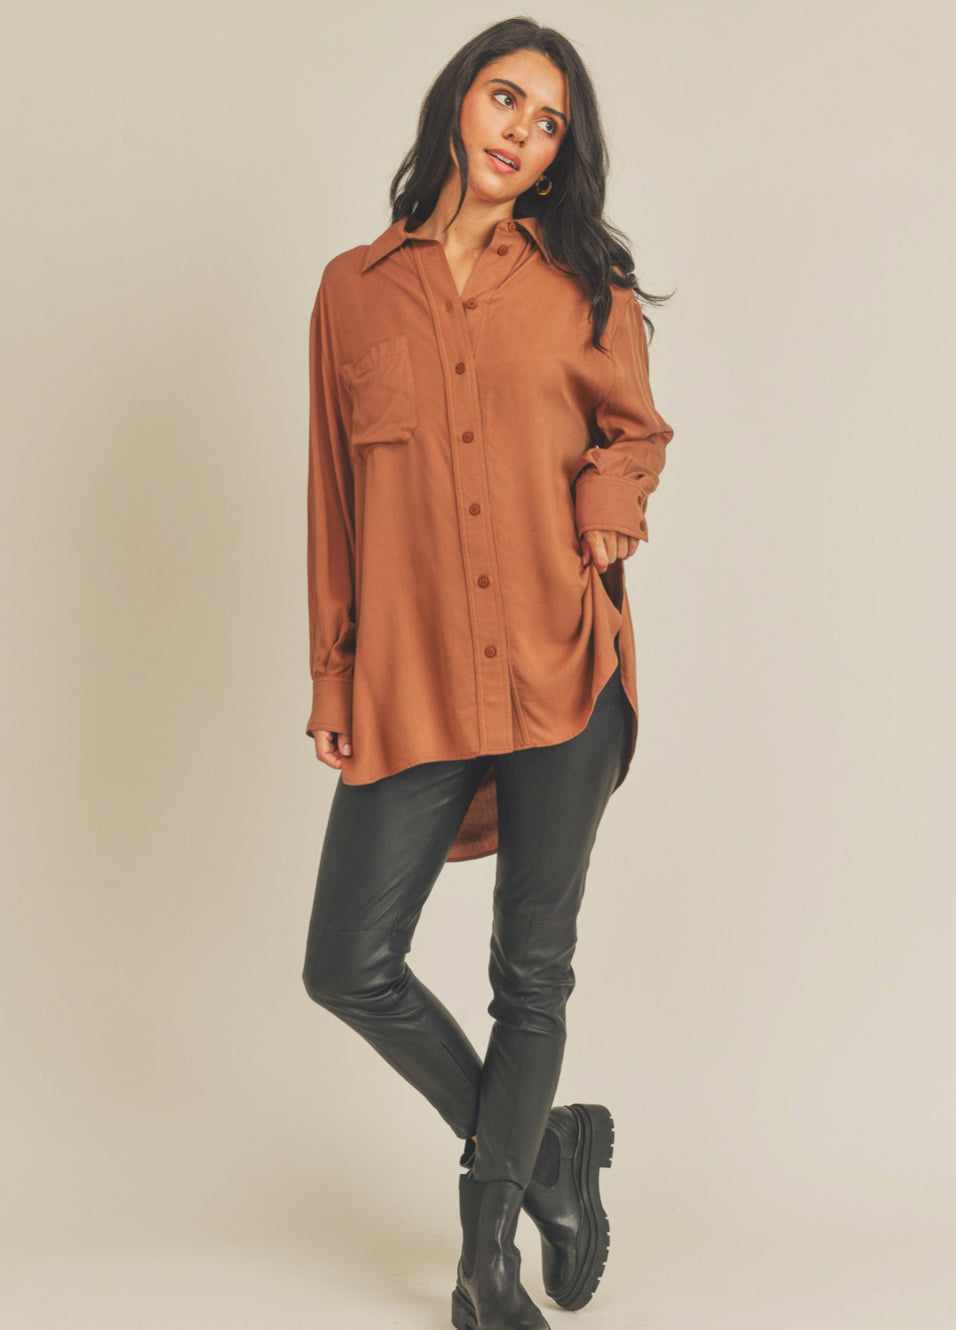 Wild Orchid Tunic Button Up - Jade Creek Boutique